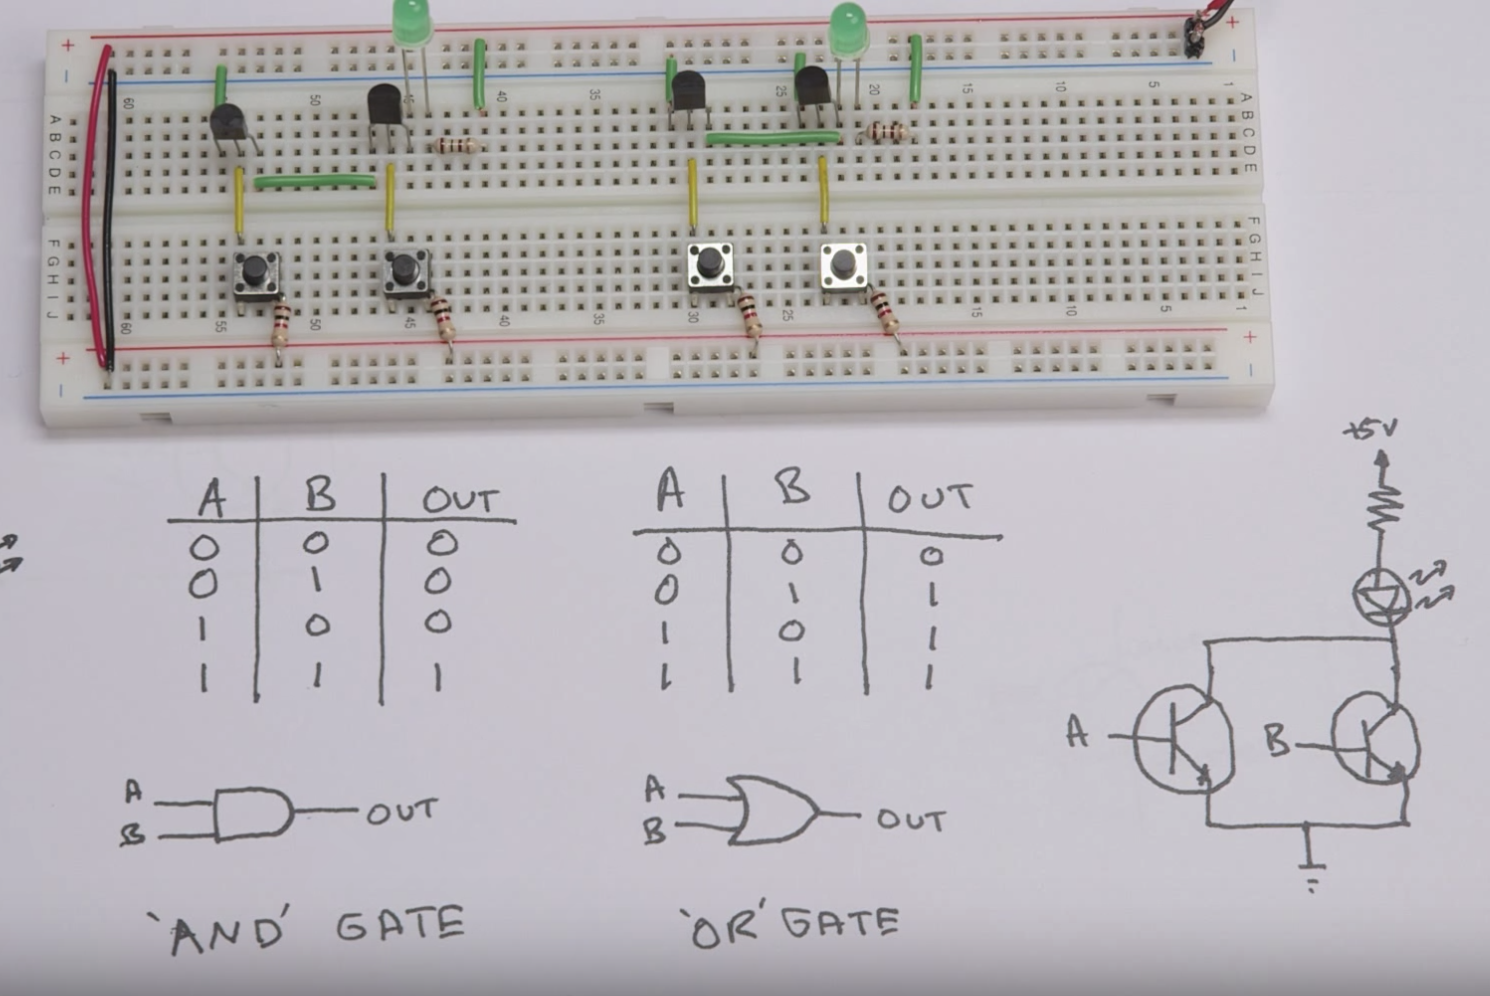 Screen capture from video. There's a breadboard at the top with wires, transistors, resistors, push buttons, and LED lights. The breadboard is on top of a piece of paper with truth tables for AND gates and OR gates, plus a diagram of the breadboard circuit.